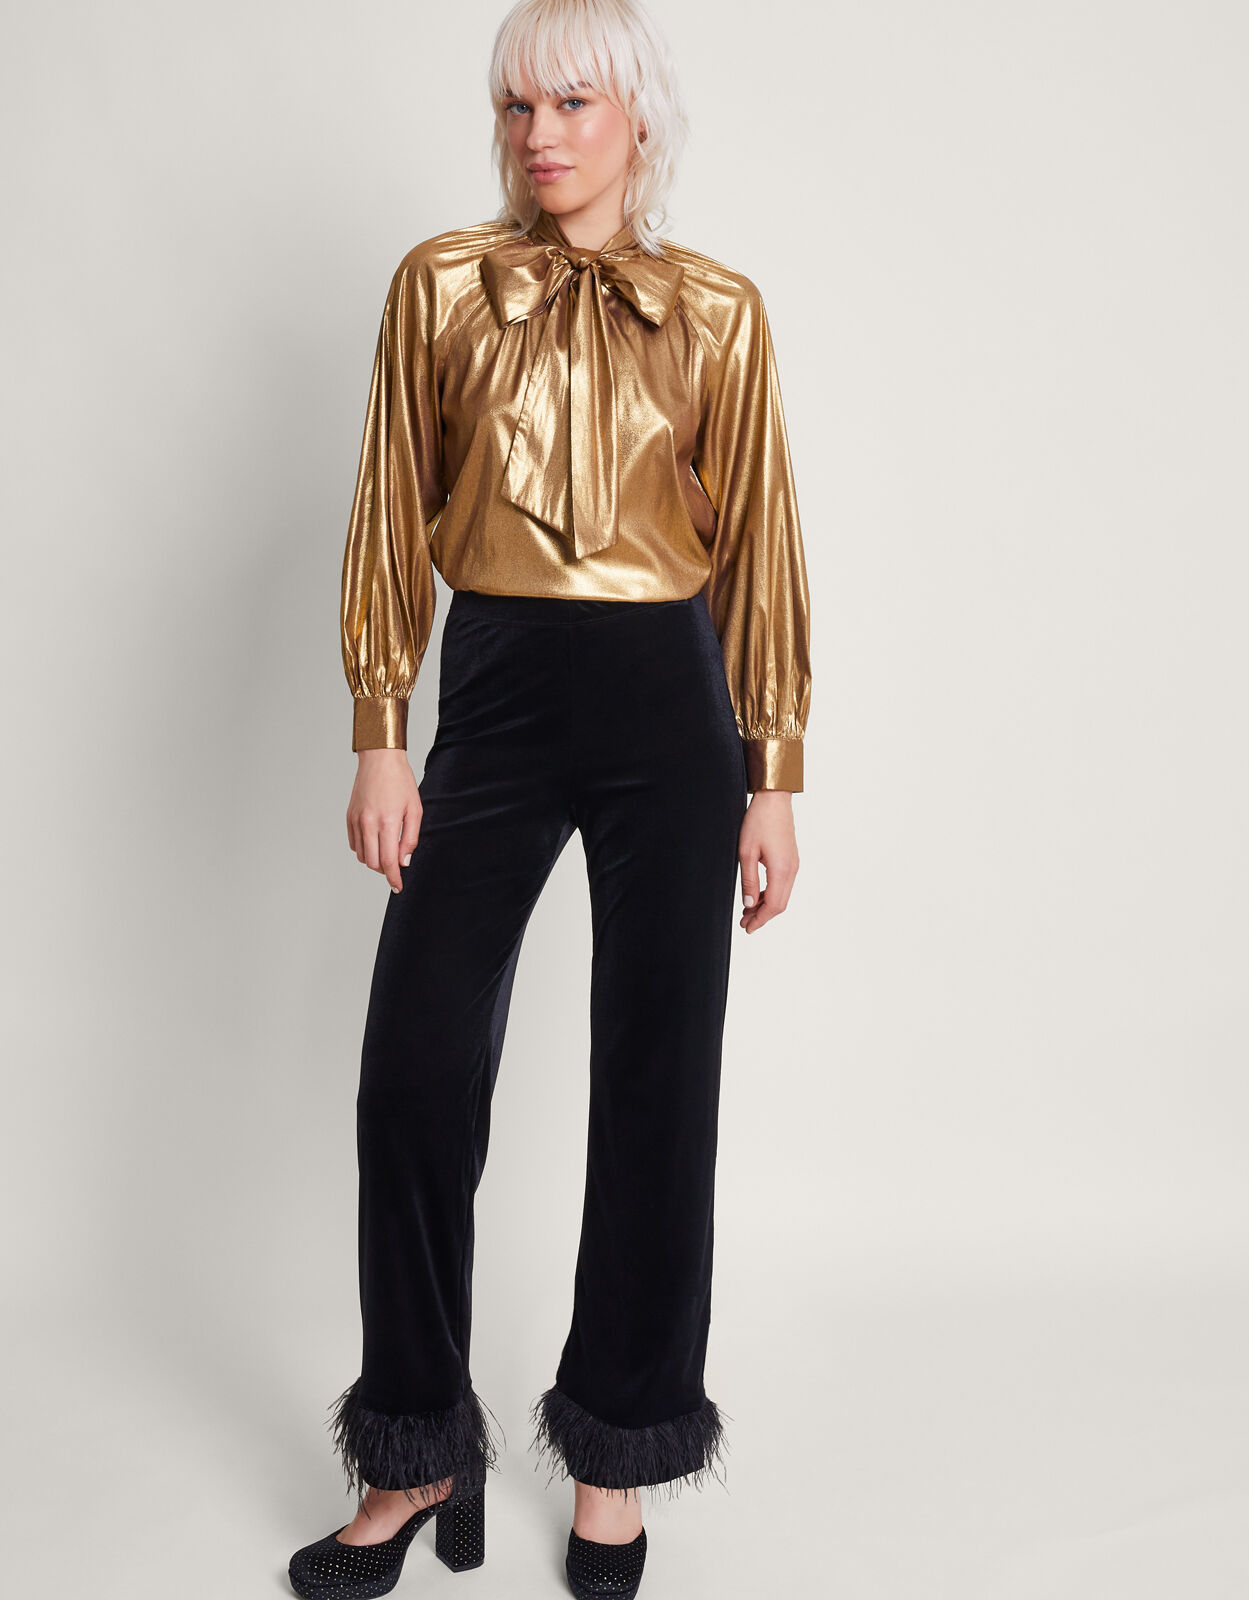 Gracie pussybow blouse gold - Monsoon Accessorize Malta